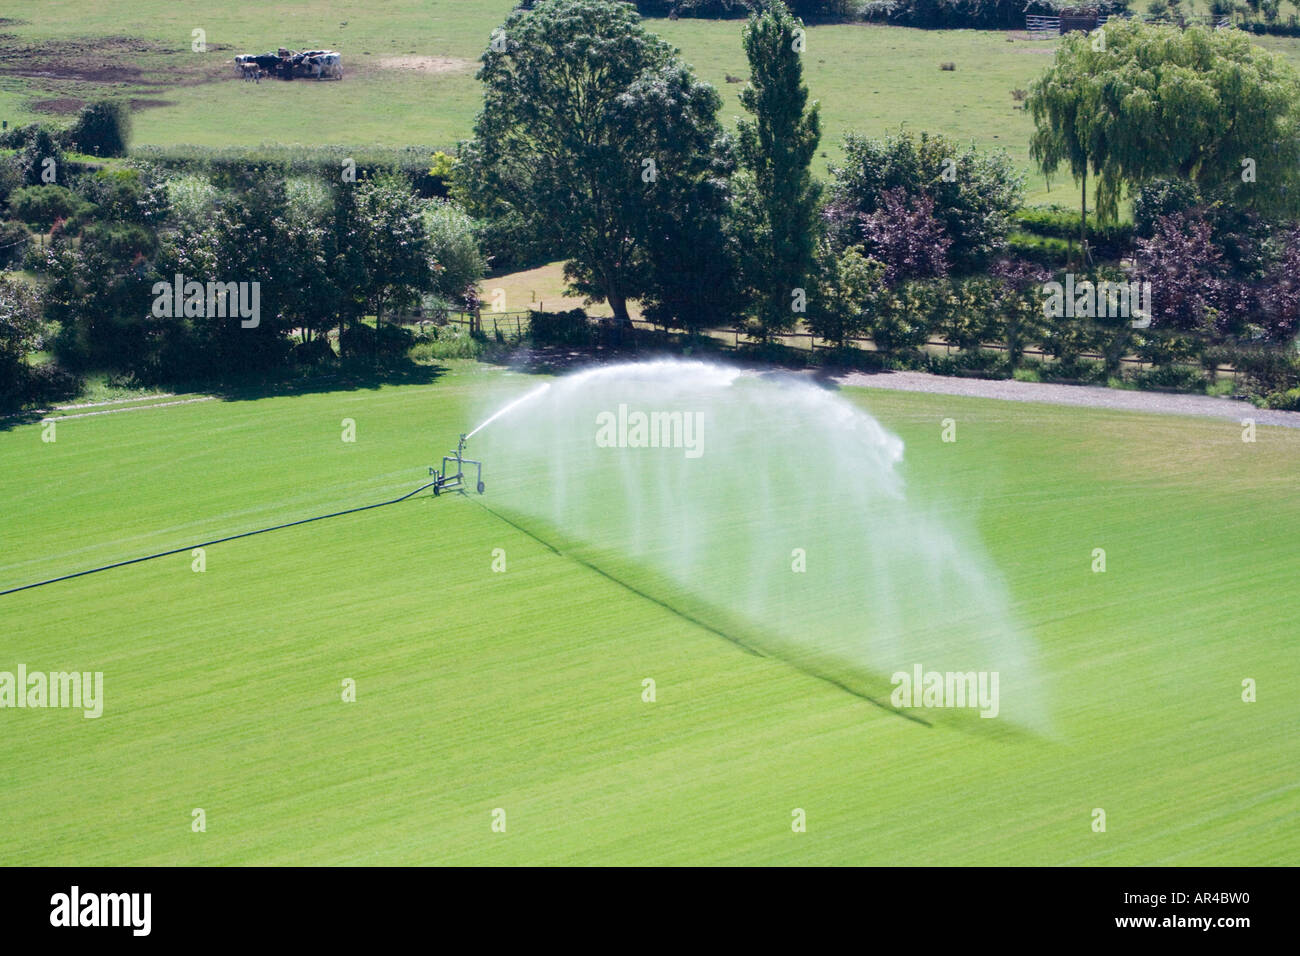 Aerial view of commercial sprinkler. High pressure irrigation of crops agricultural land and lawns.  Farm. Dorset. UK. Summer Stock Photo